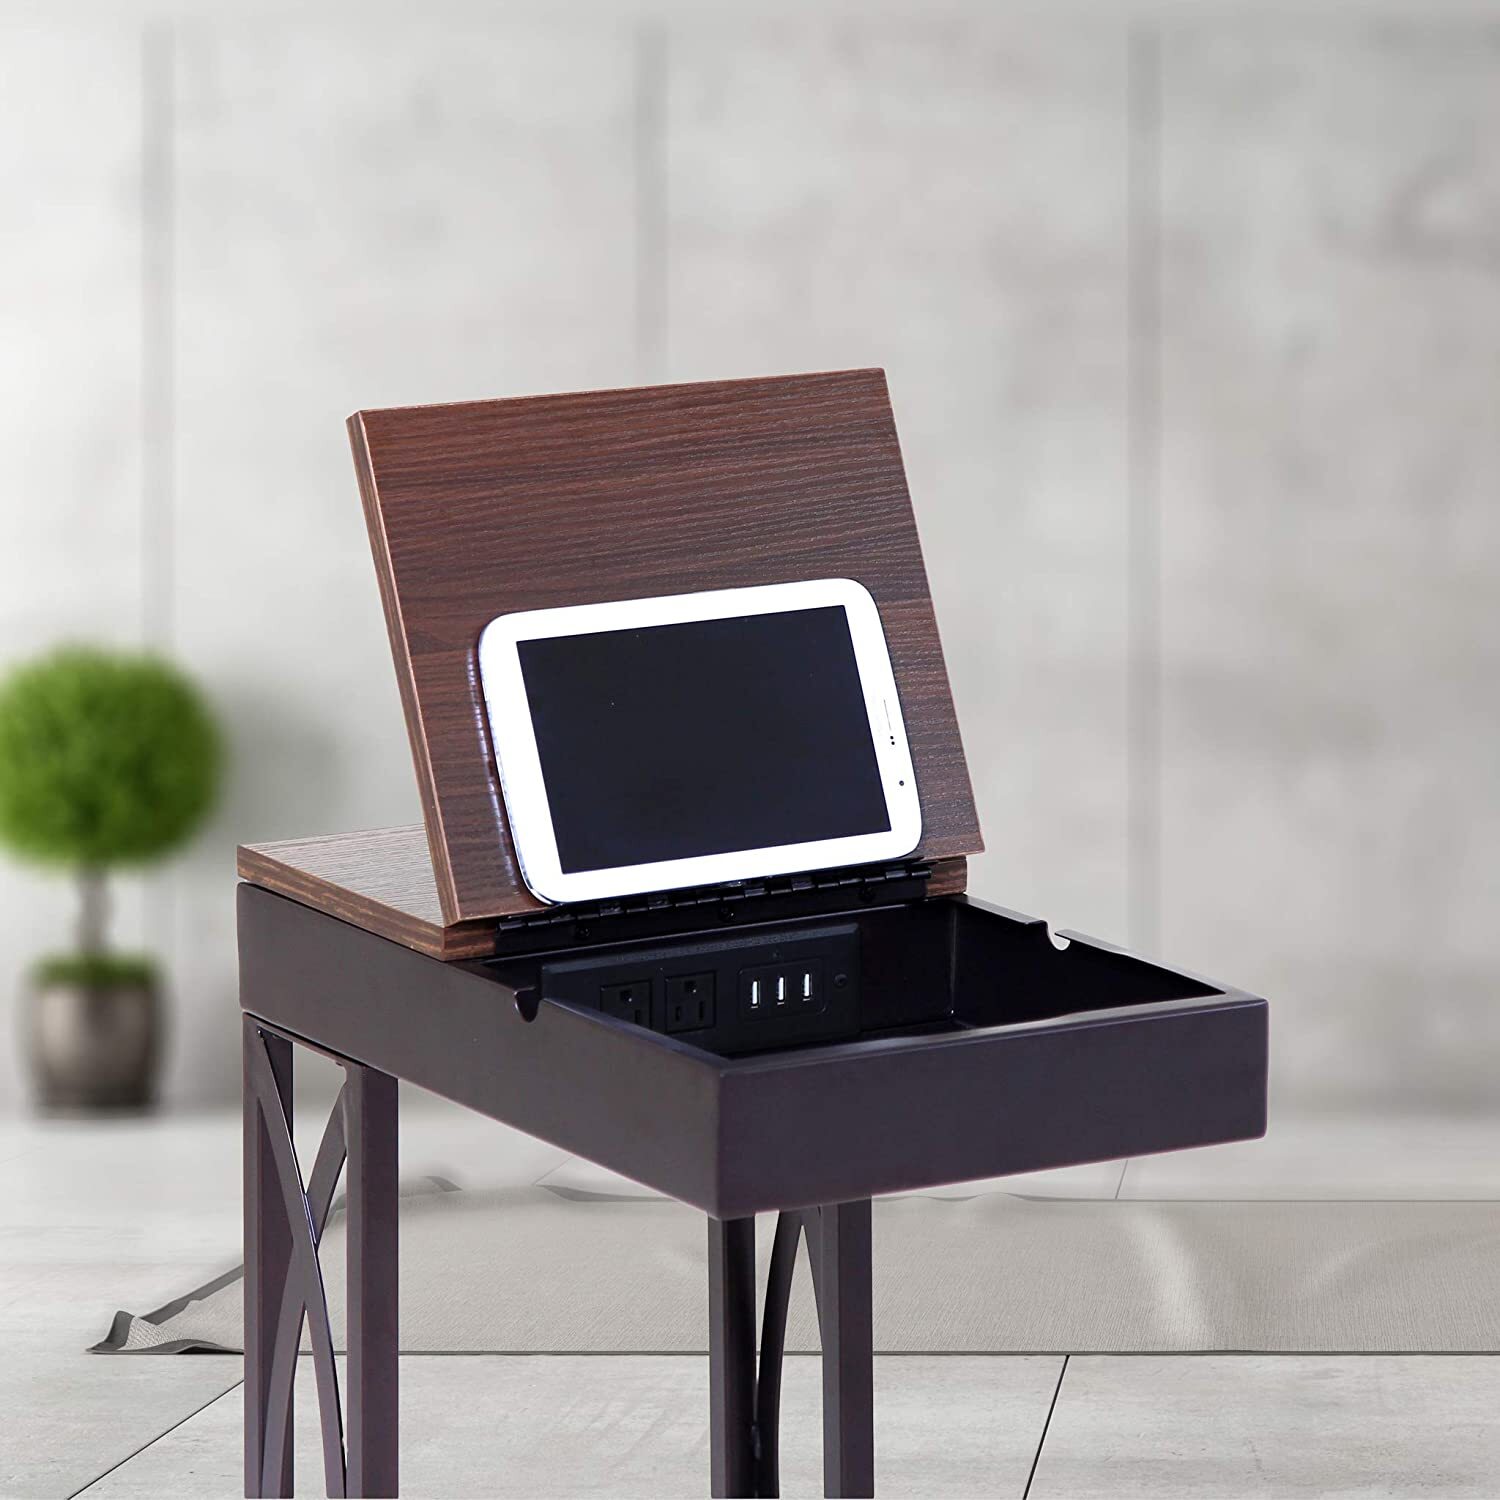 Metal TV Tray with an In Built Charging Station